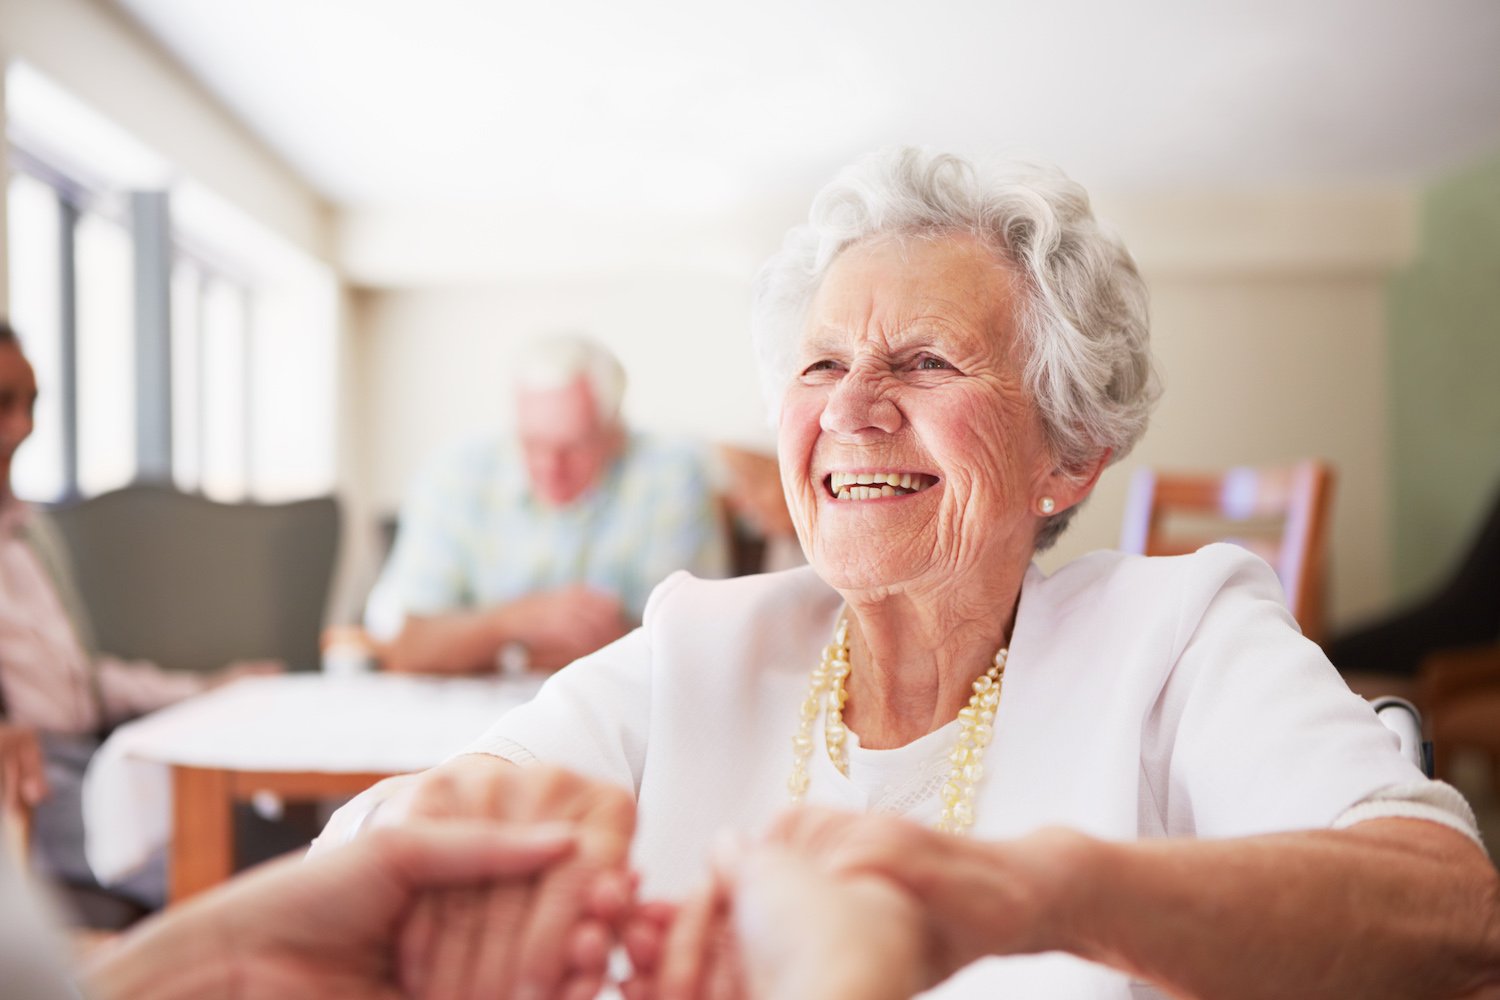 A senior woman smiling and holding the hands of someone out of frame